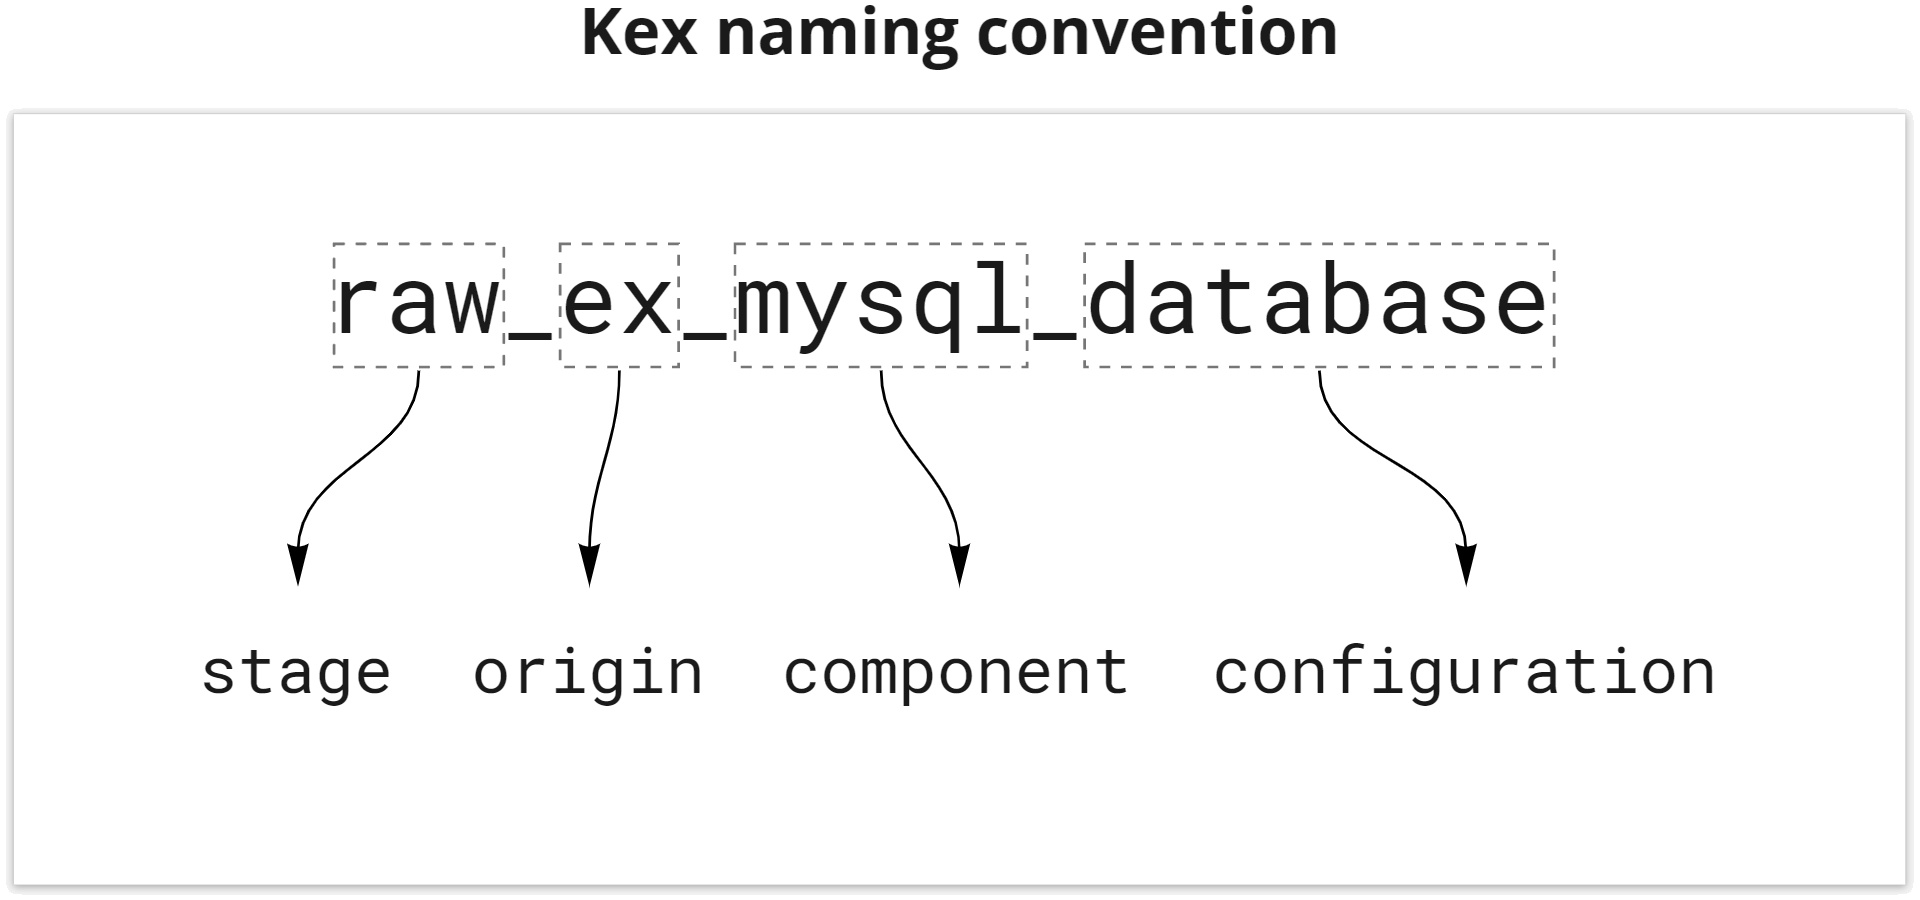 Kex naming convention